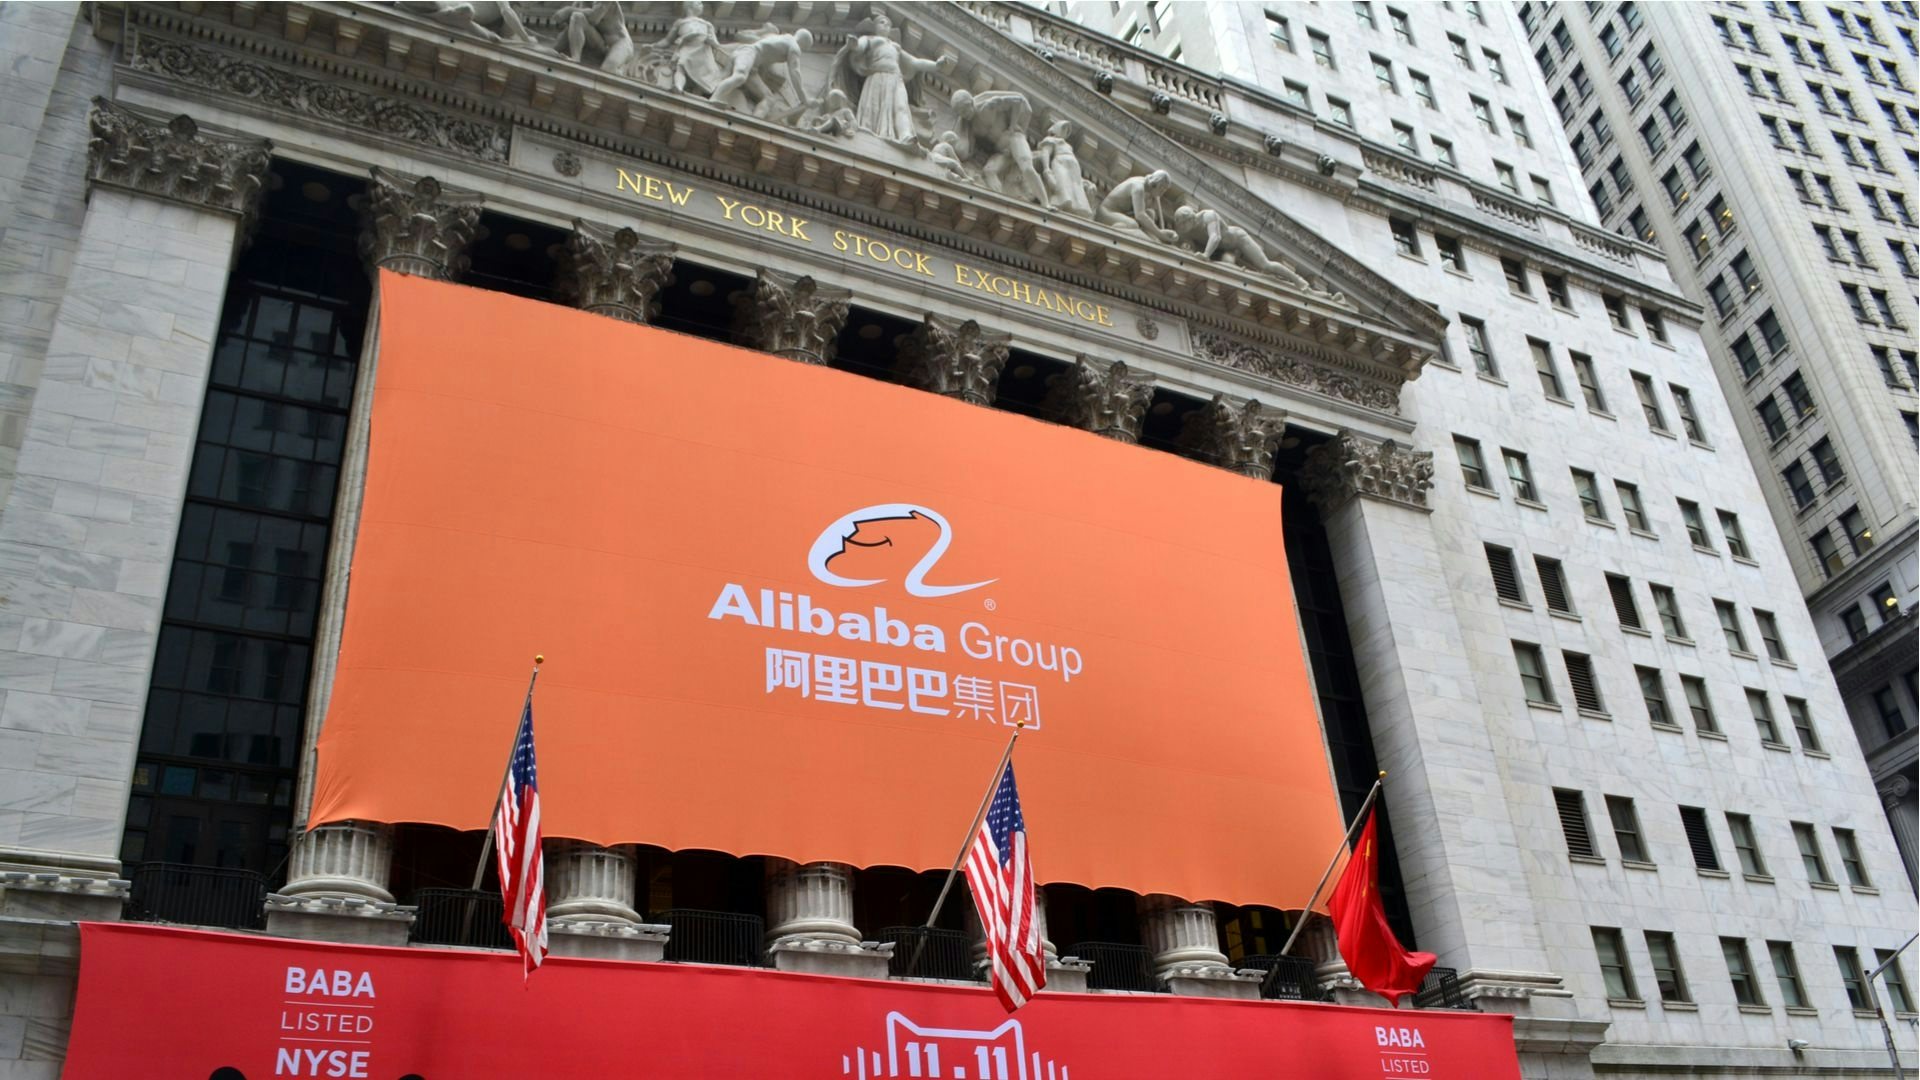 Alibaba reported revenue growth of 54 percent year-on-year in the quarter ending Sept. 30, but missed analysts' forecasts. Photo: Shutterstock